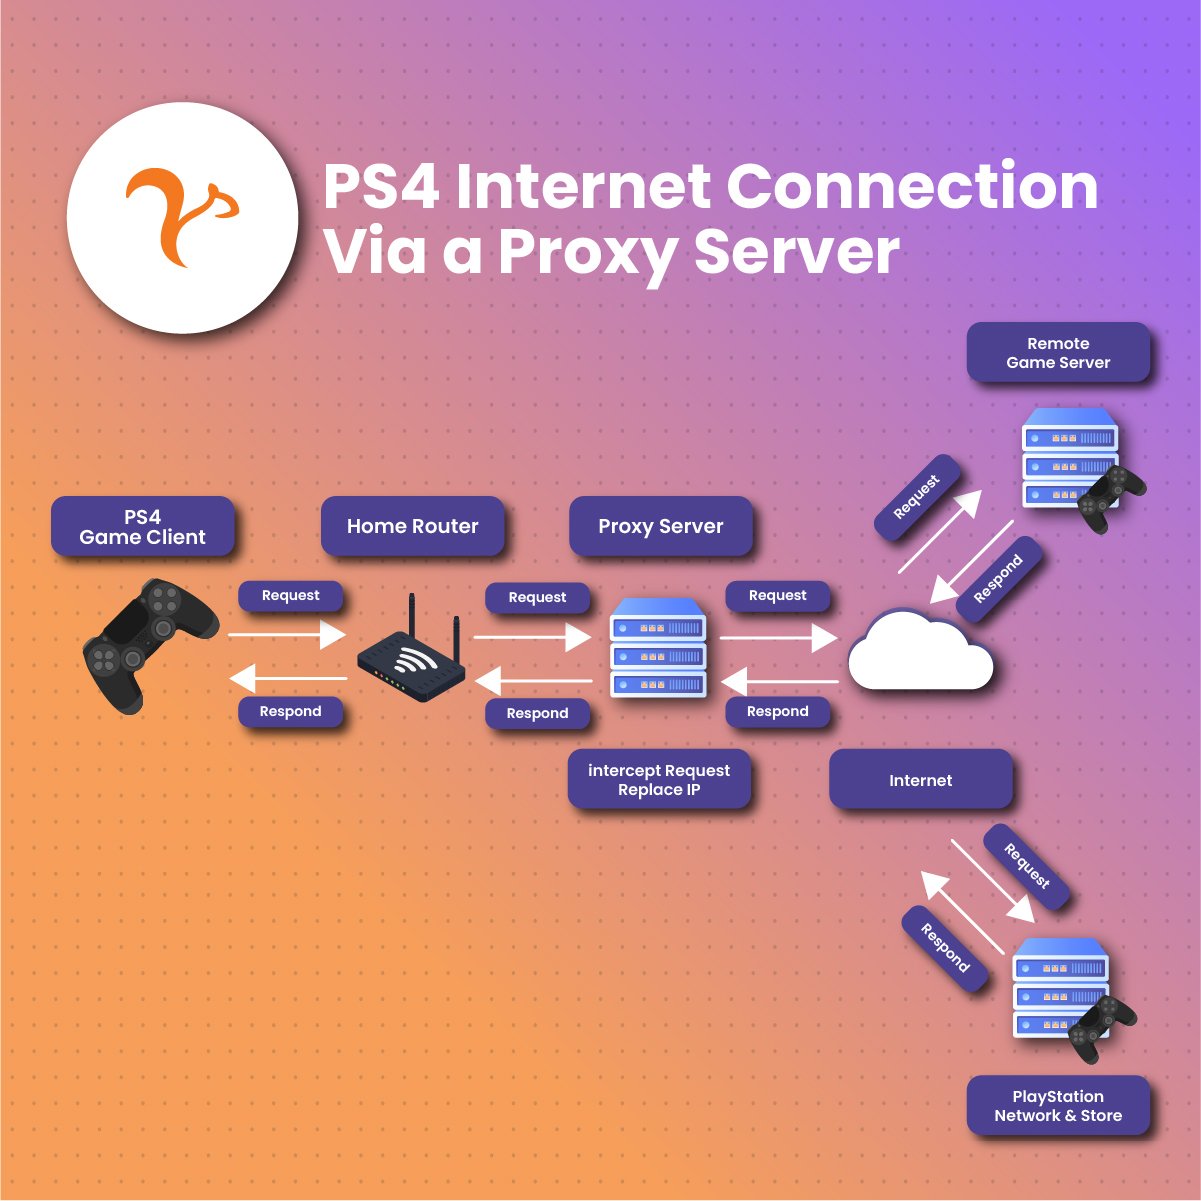 Proxy Server for a PS4